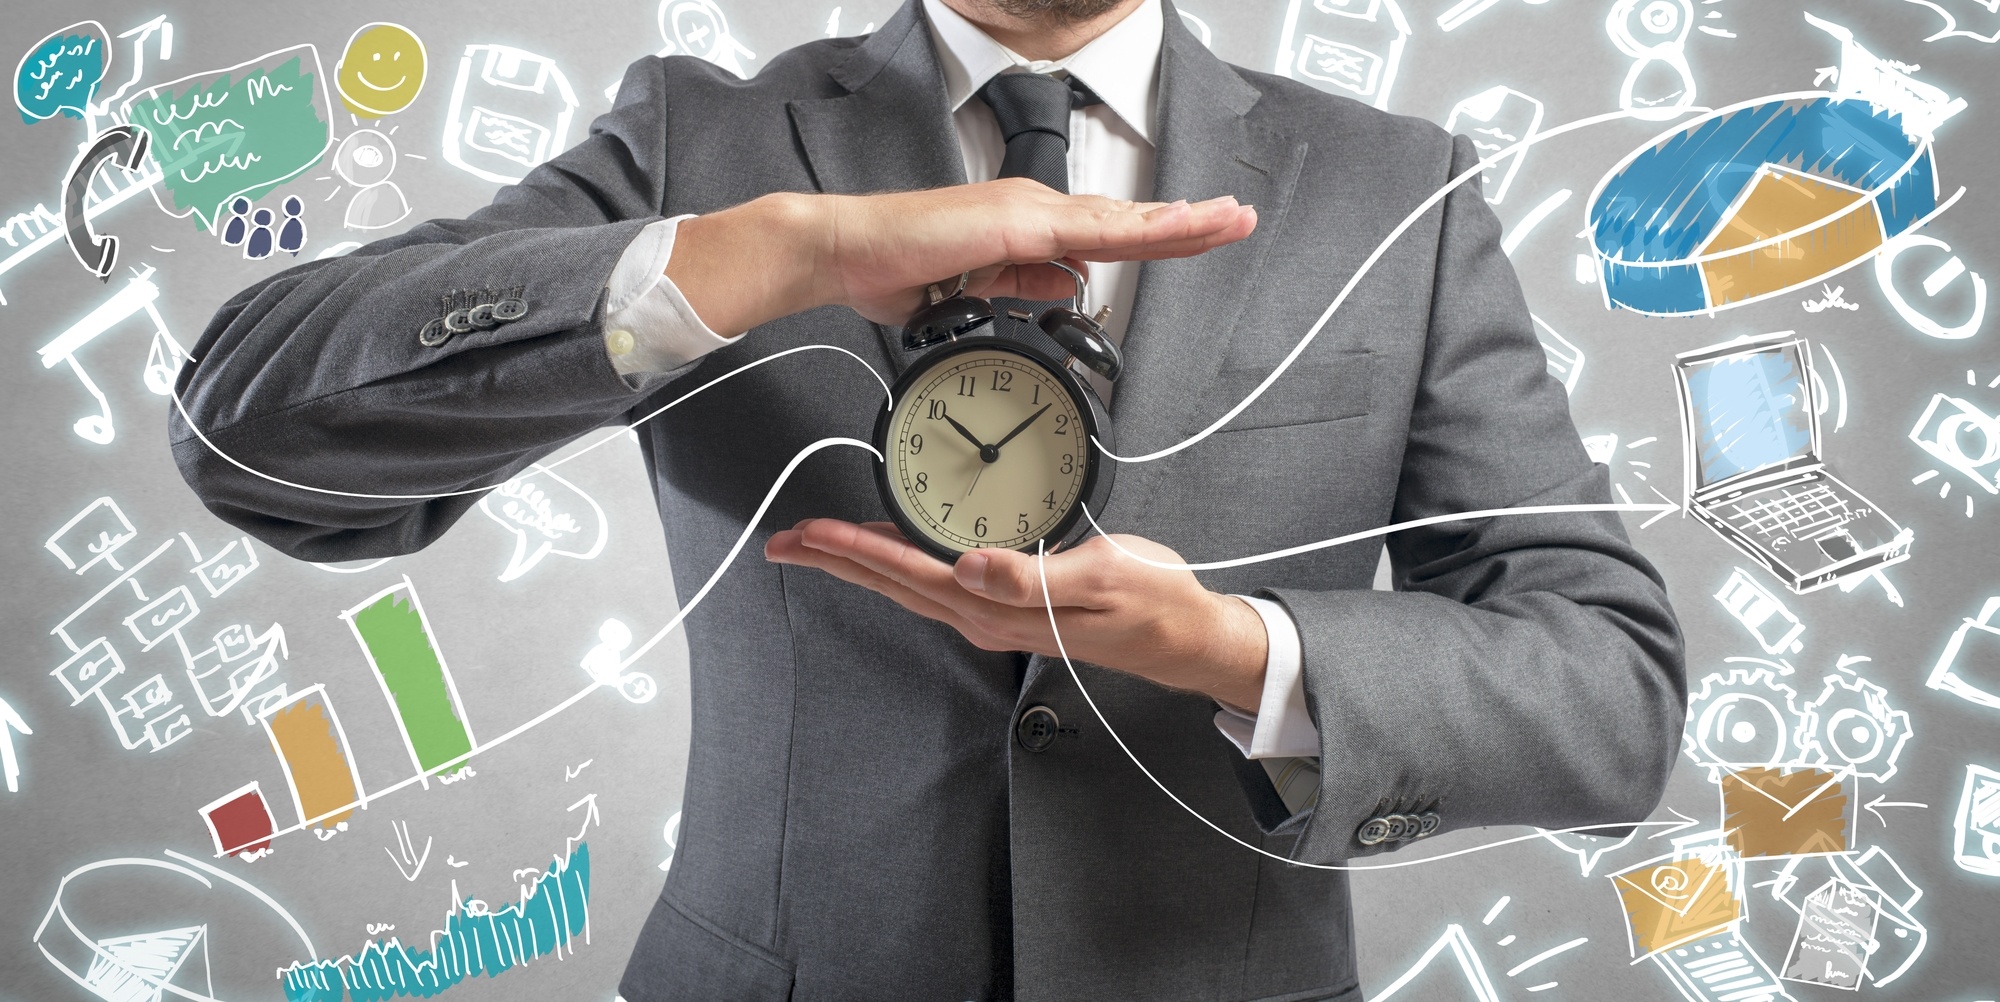 With Short Attention Spans, Timing and Pacing Is Everything in B2B Sales Demos